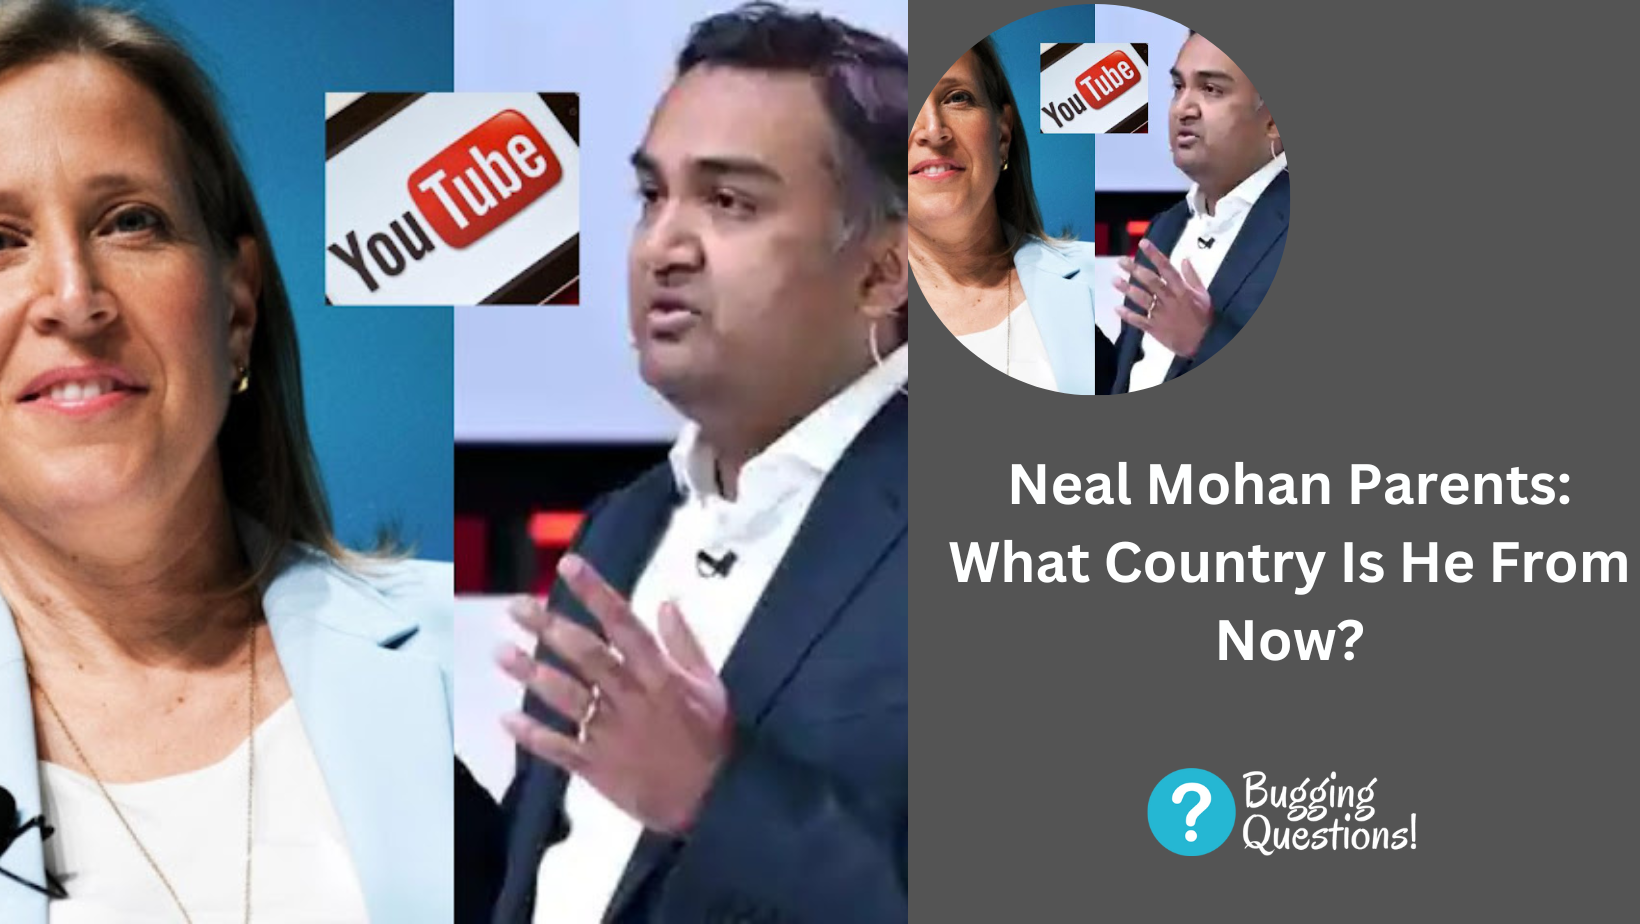 Neal Mohan Parents: What Country Is He From Now?